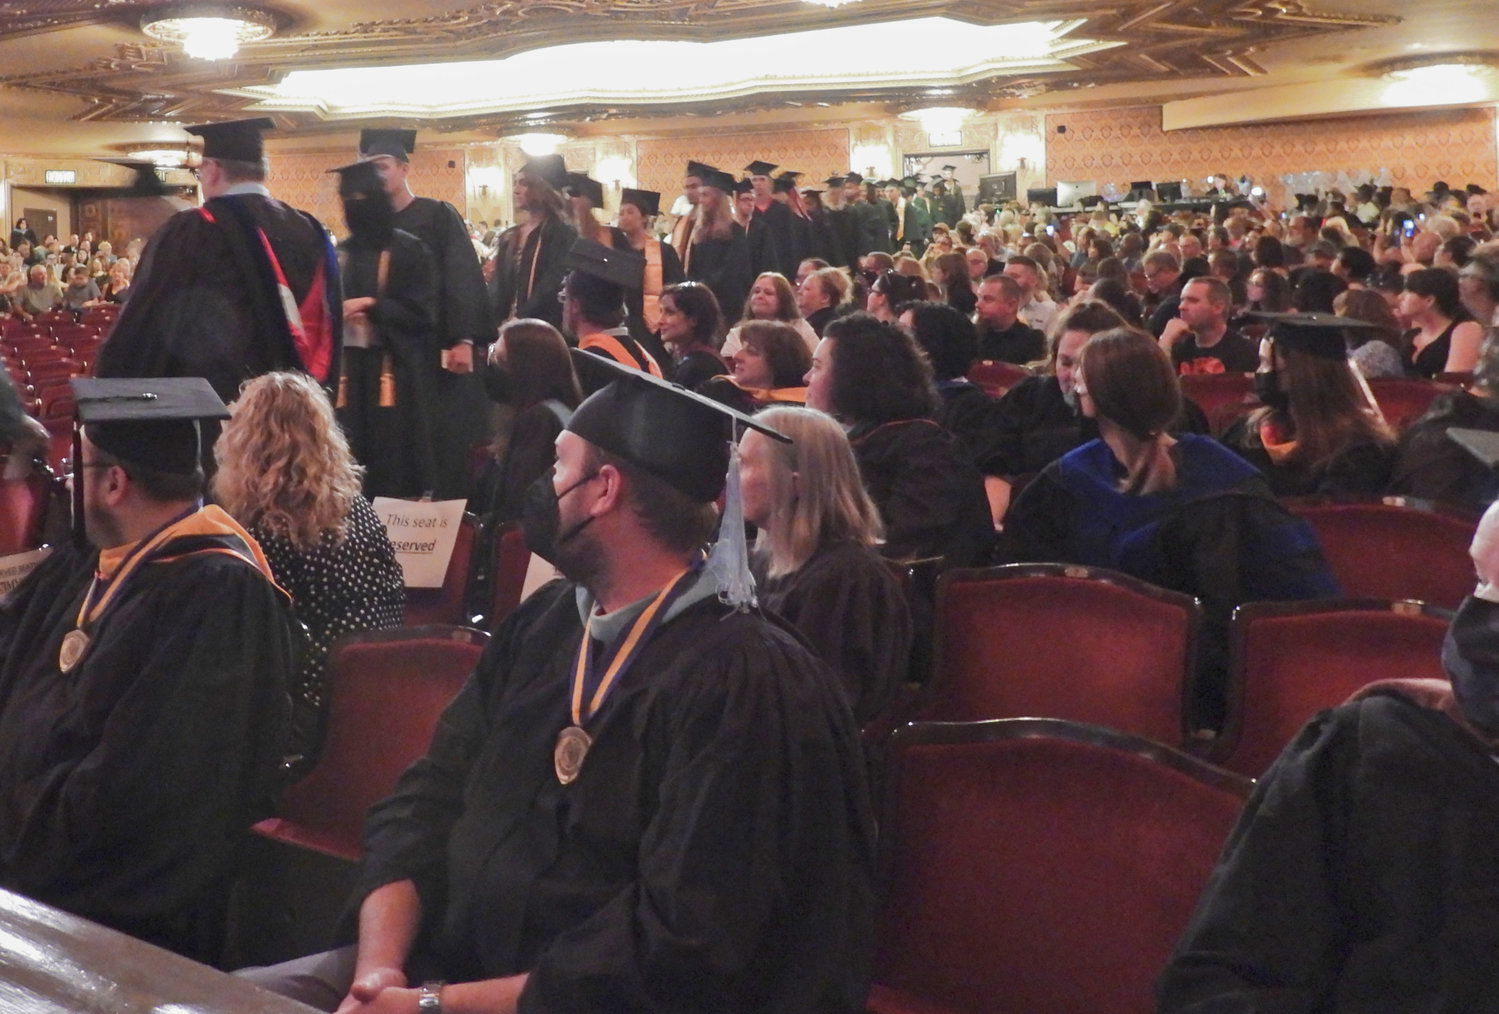 Mohawk Valley Community College graduates walk down the aisle of the Stanley Theater, ready to receive their diplomas and begin the next chapter of their life.